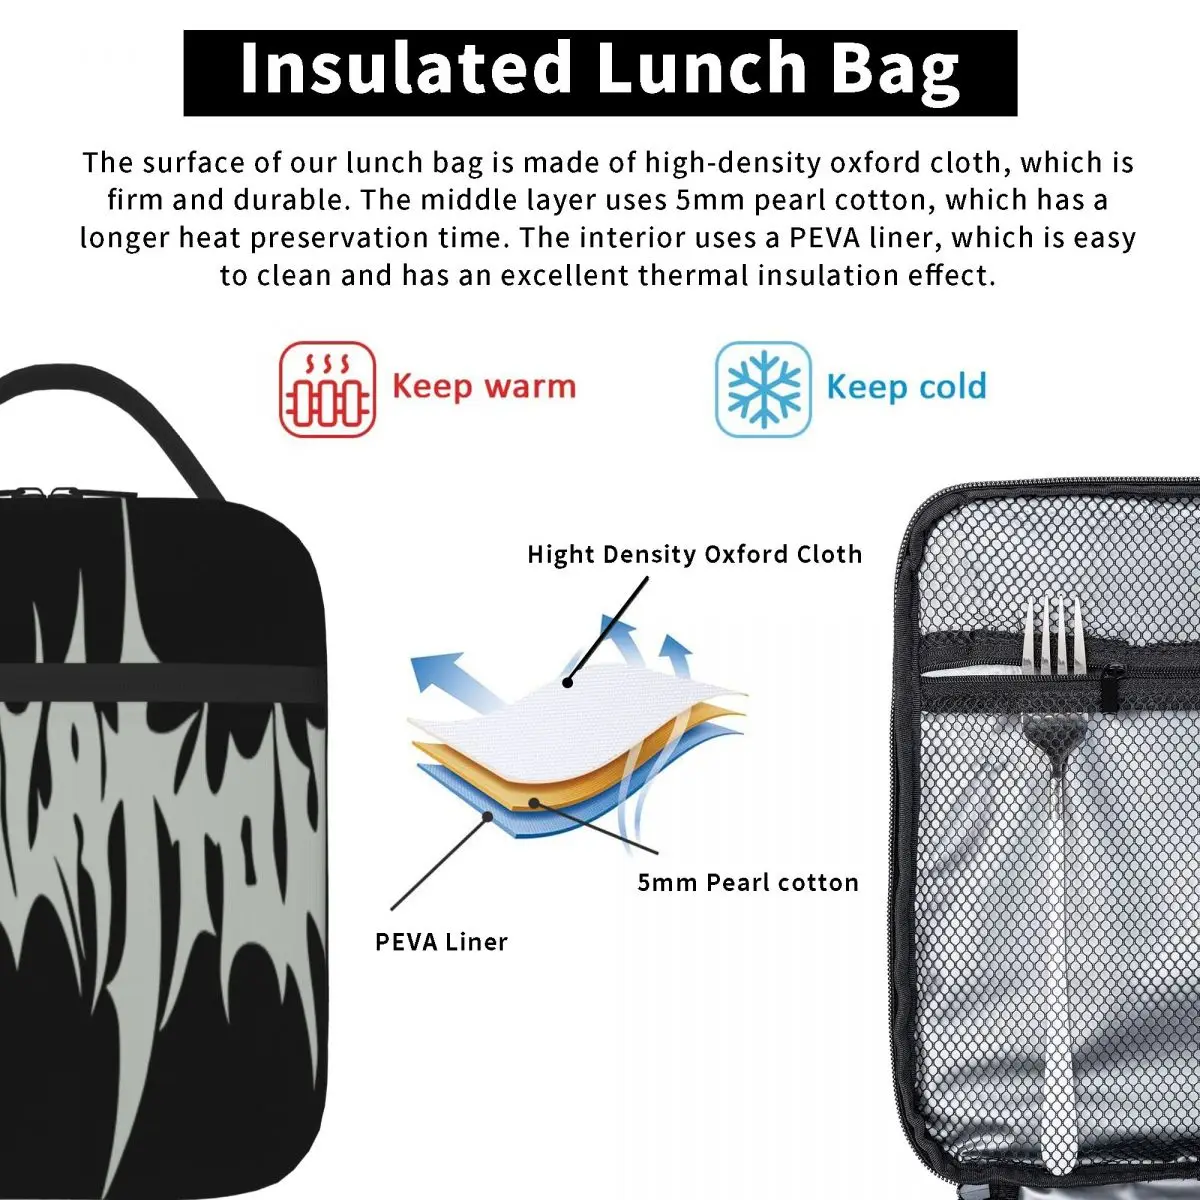 Immolation Death Metal IWocation Lunch Tote, Lunchbox, Sacs thermiques, Boîte isotherme